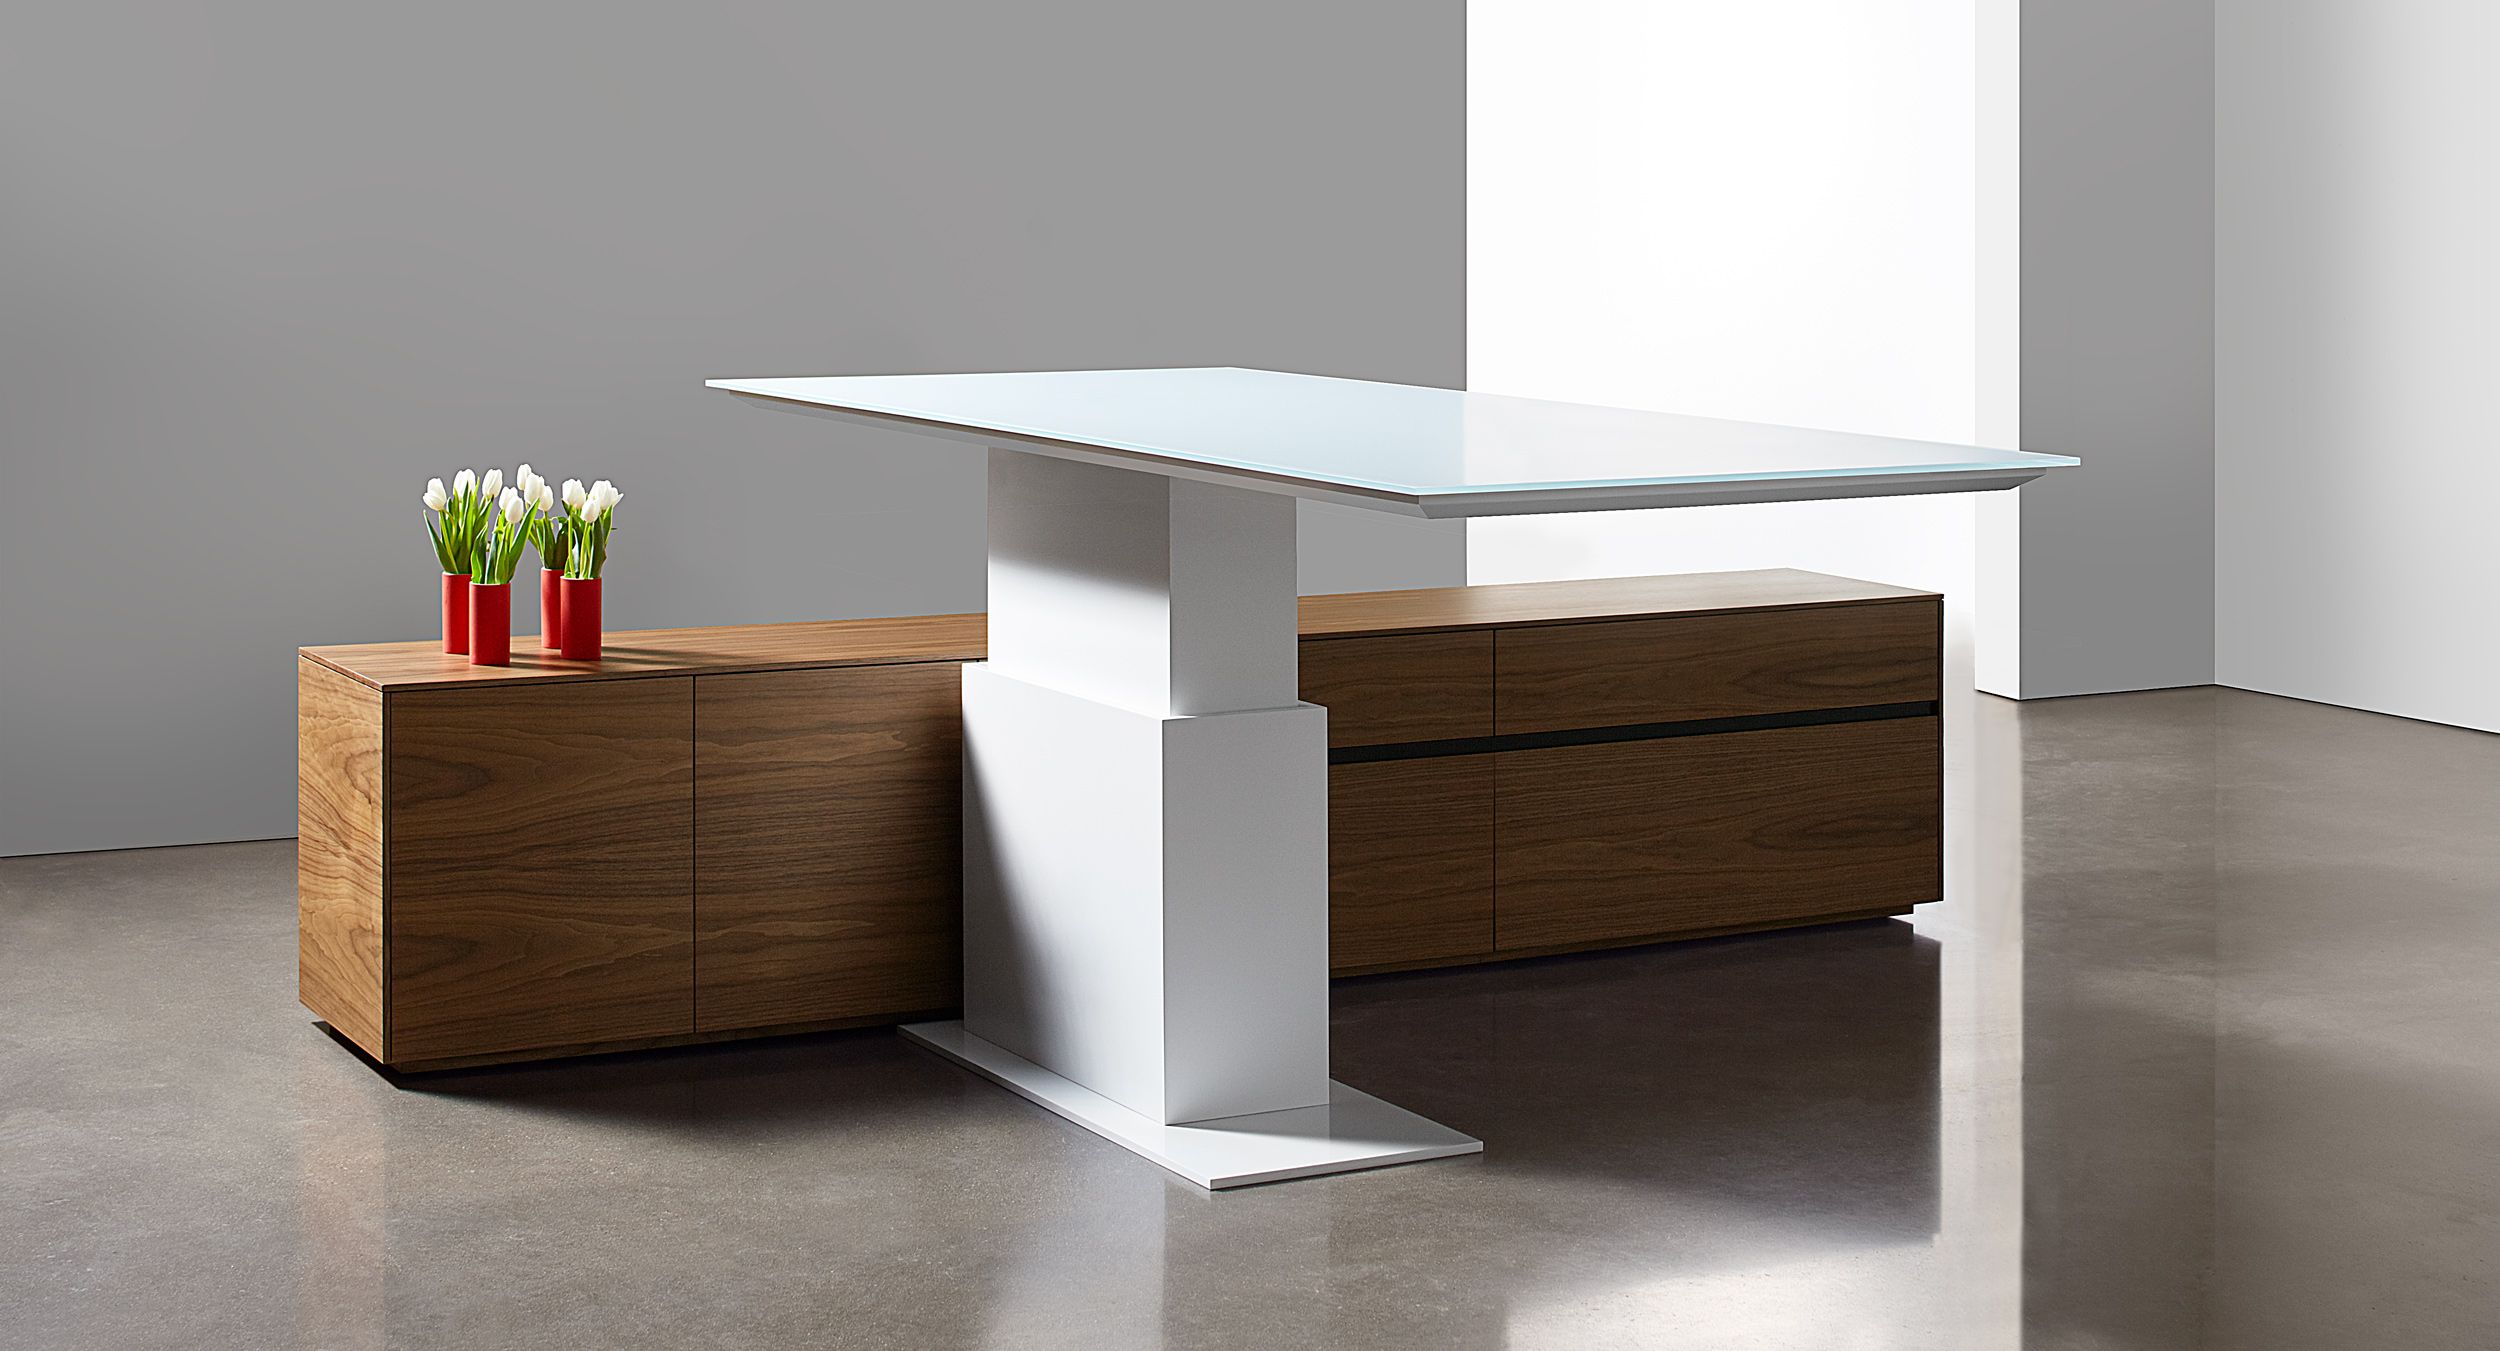 This adjustable-height desk features a cantilevered surface and refined minimalism.